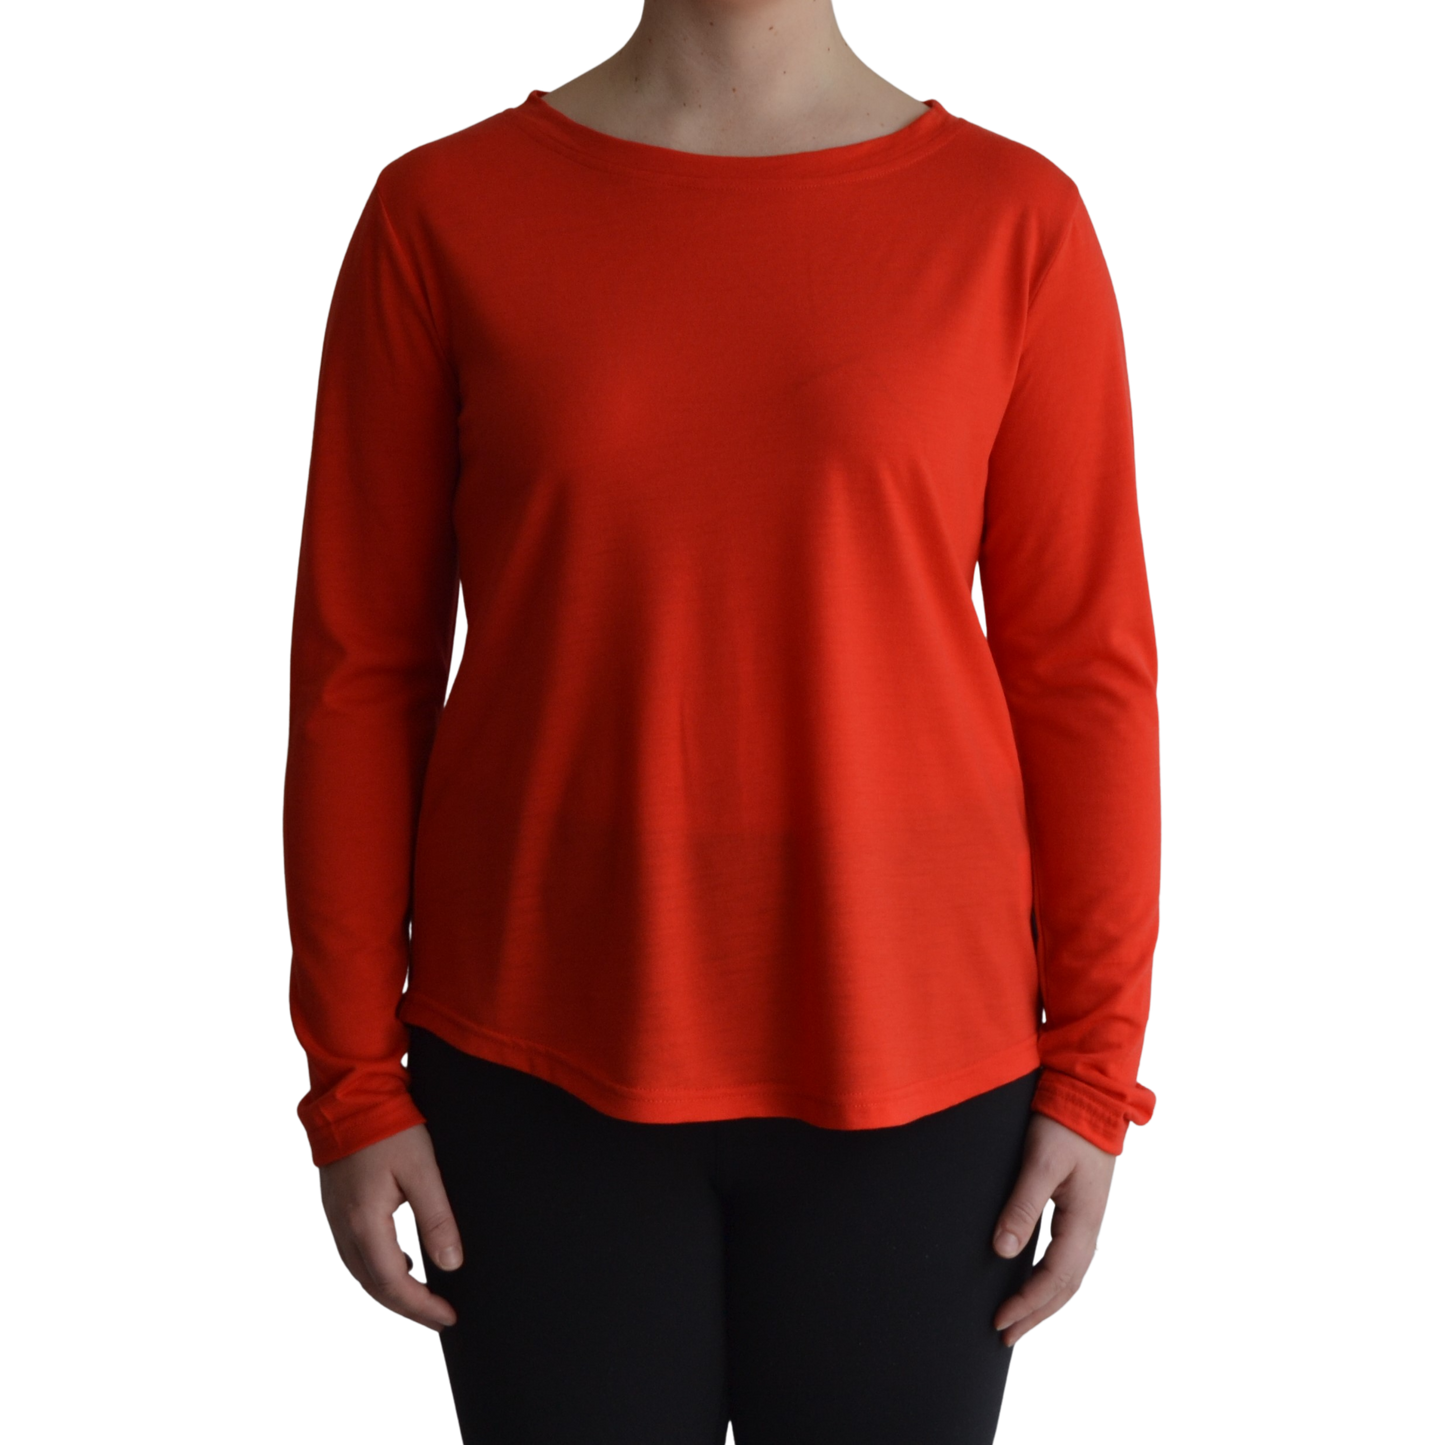 Links long sleeve merino top in mandarin colour, model faces forward showing the front of the top with scooped neck and hemline.. 